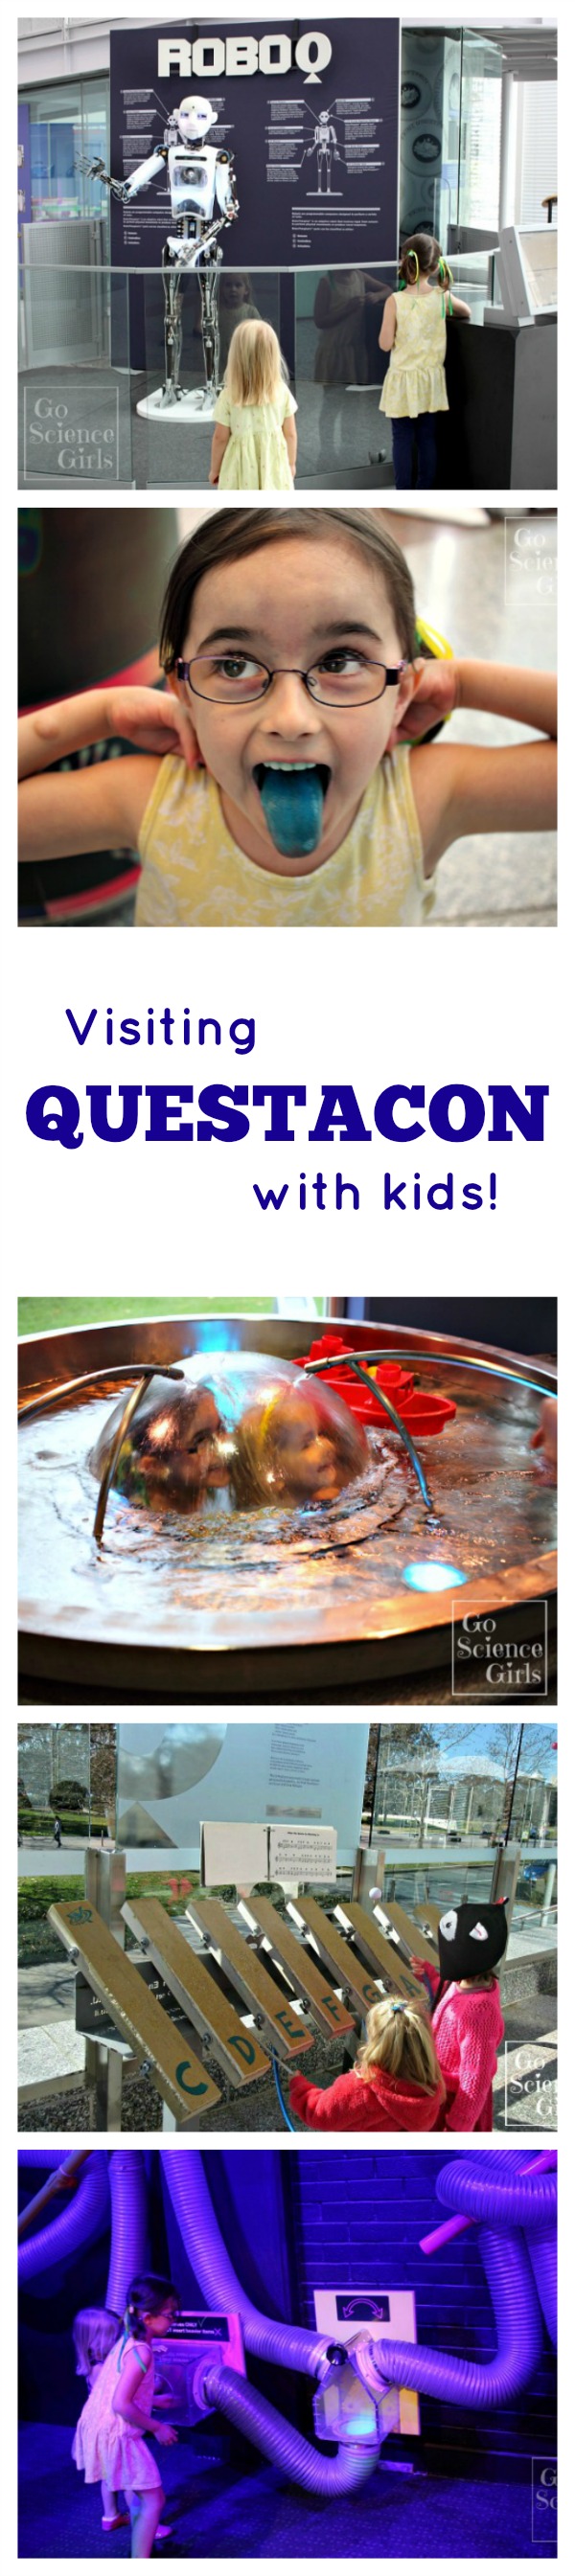 Visiting Questacon with kids - science and technology fun!